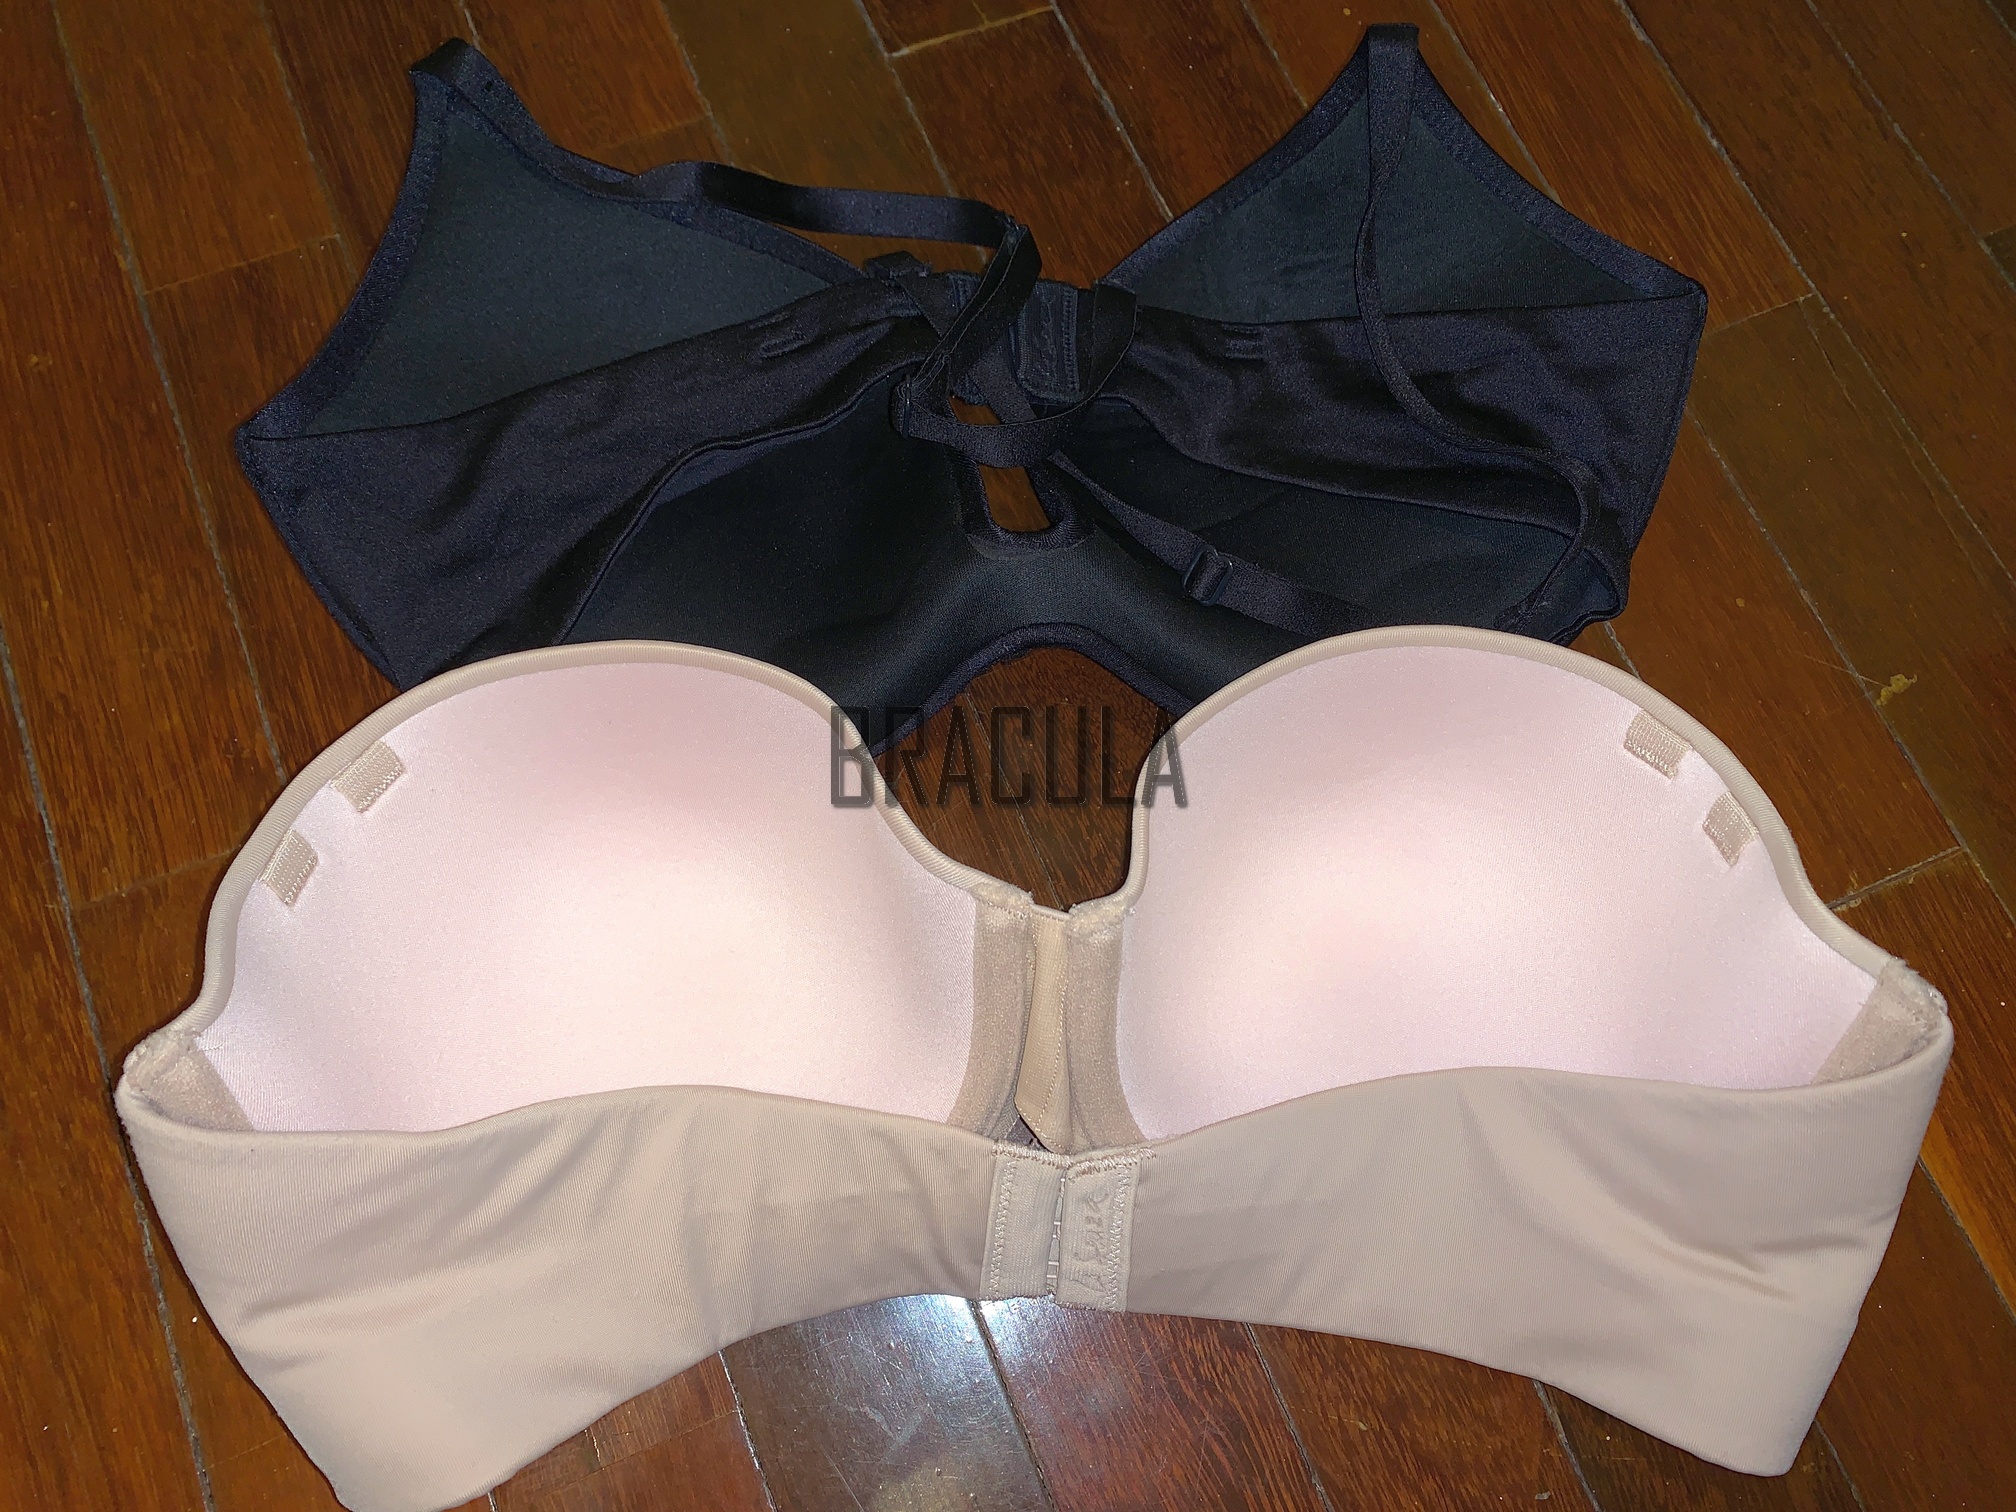 Bracula on X: Since you guys like D cup bras so much, here are TWO La  Senza D cup bras. Hope you like the big bra cups. Can you guess the band